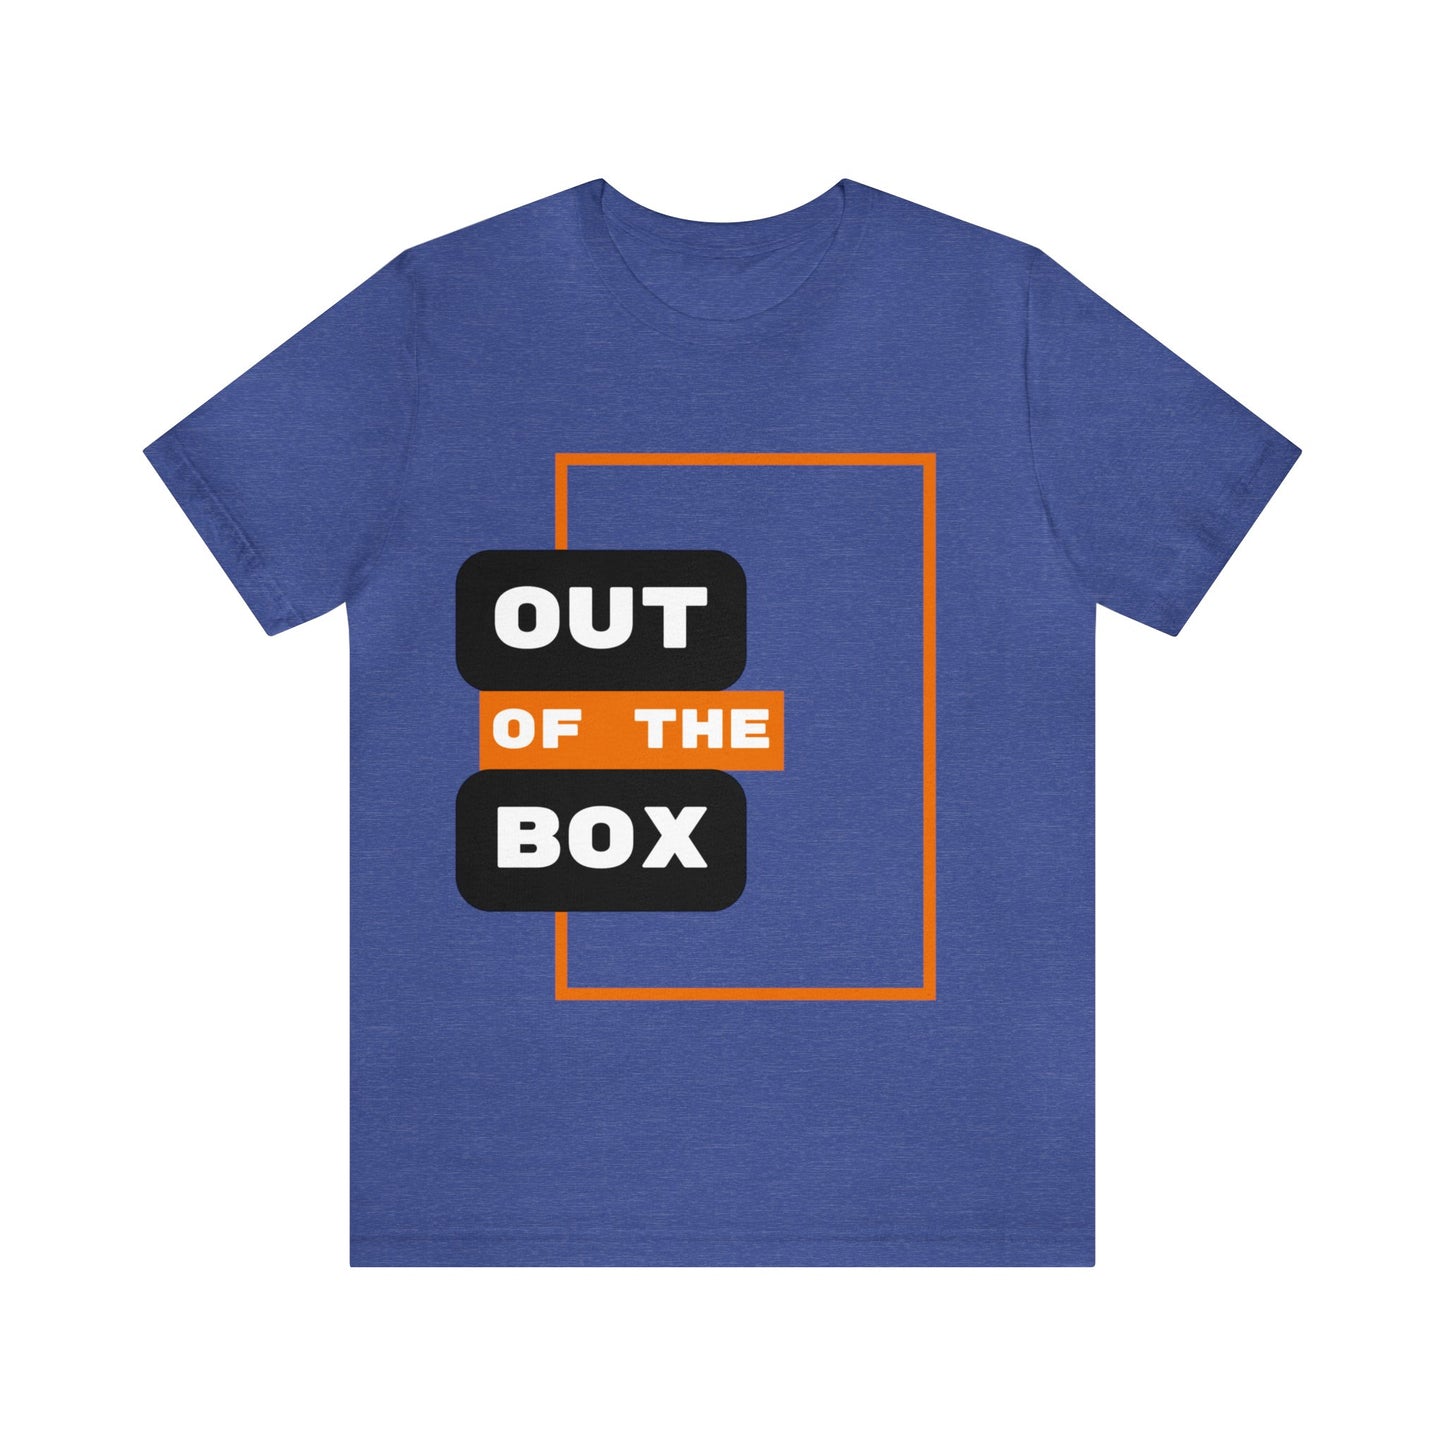 Out Of The Box - Graphic T Shirt For Men and Women